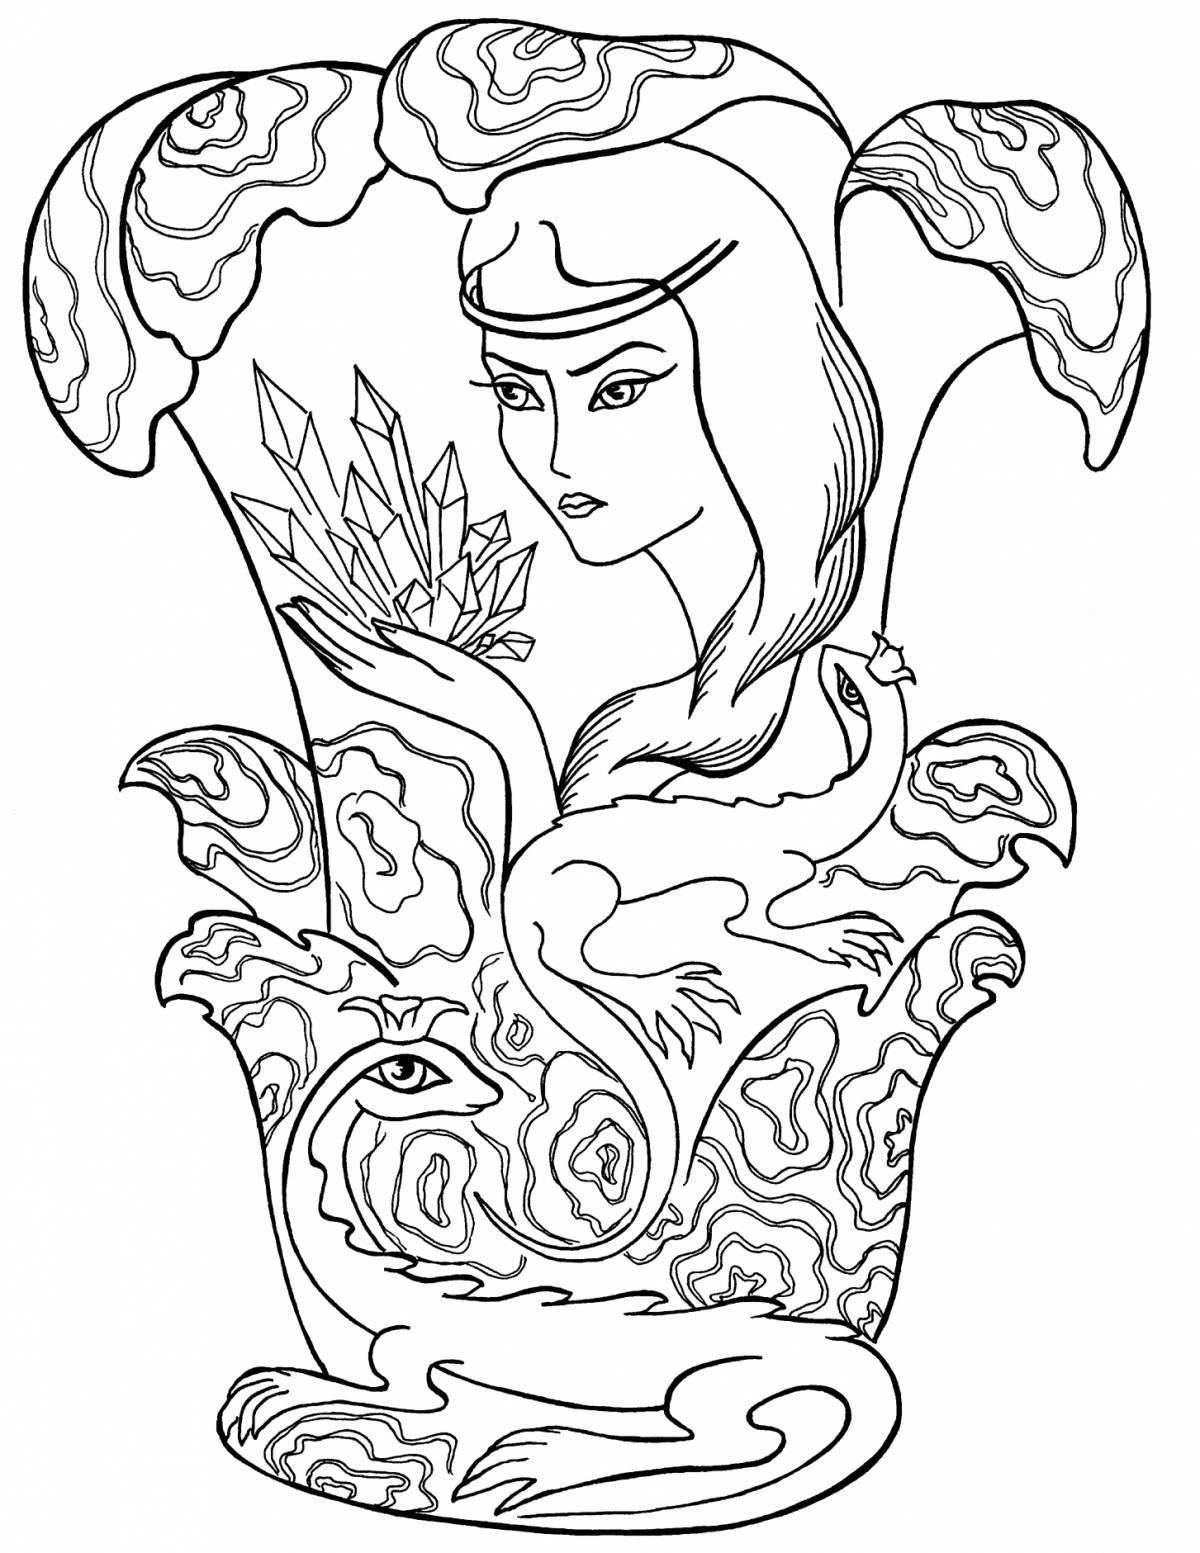 Coloring page majestic mistress of the copper mountain